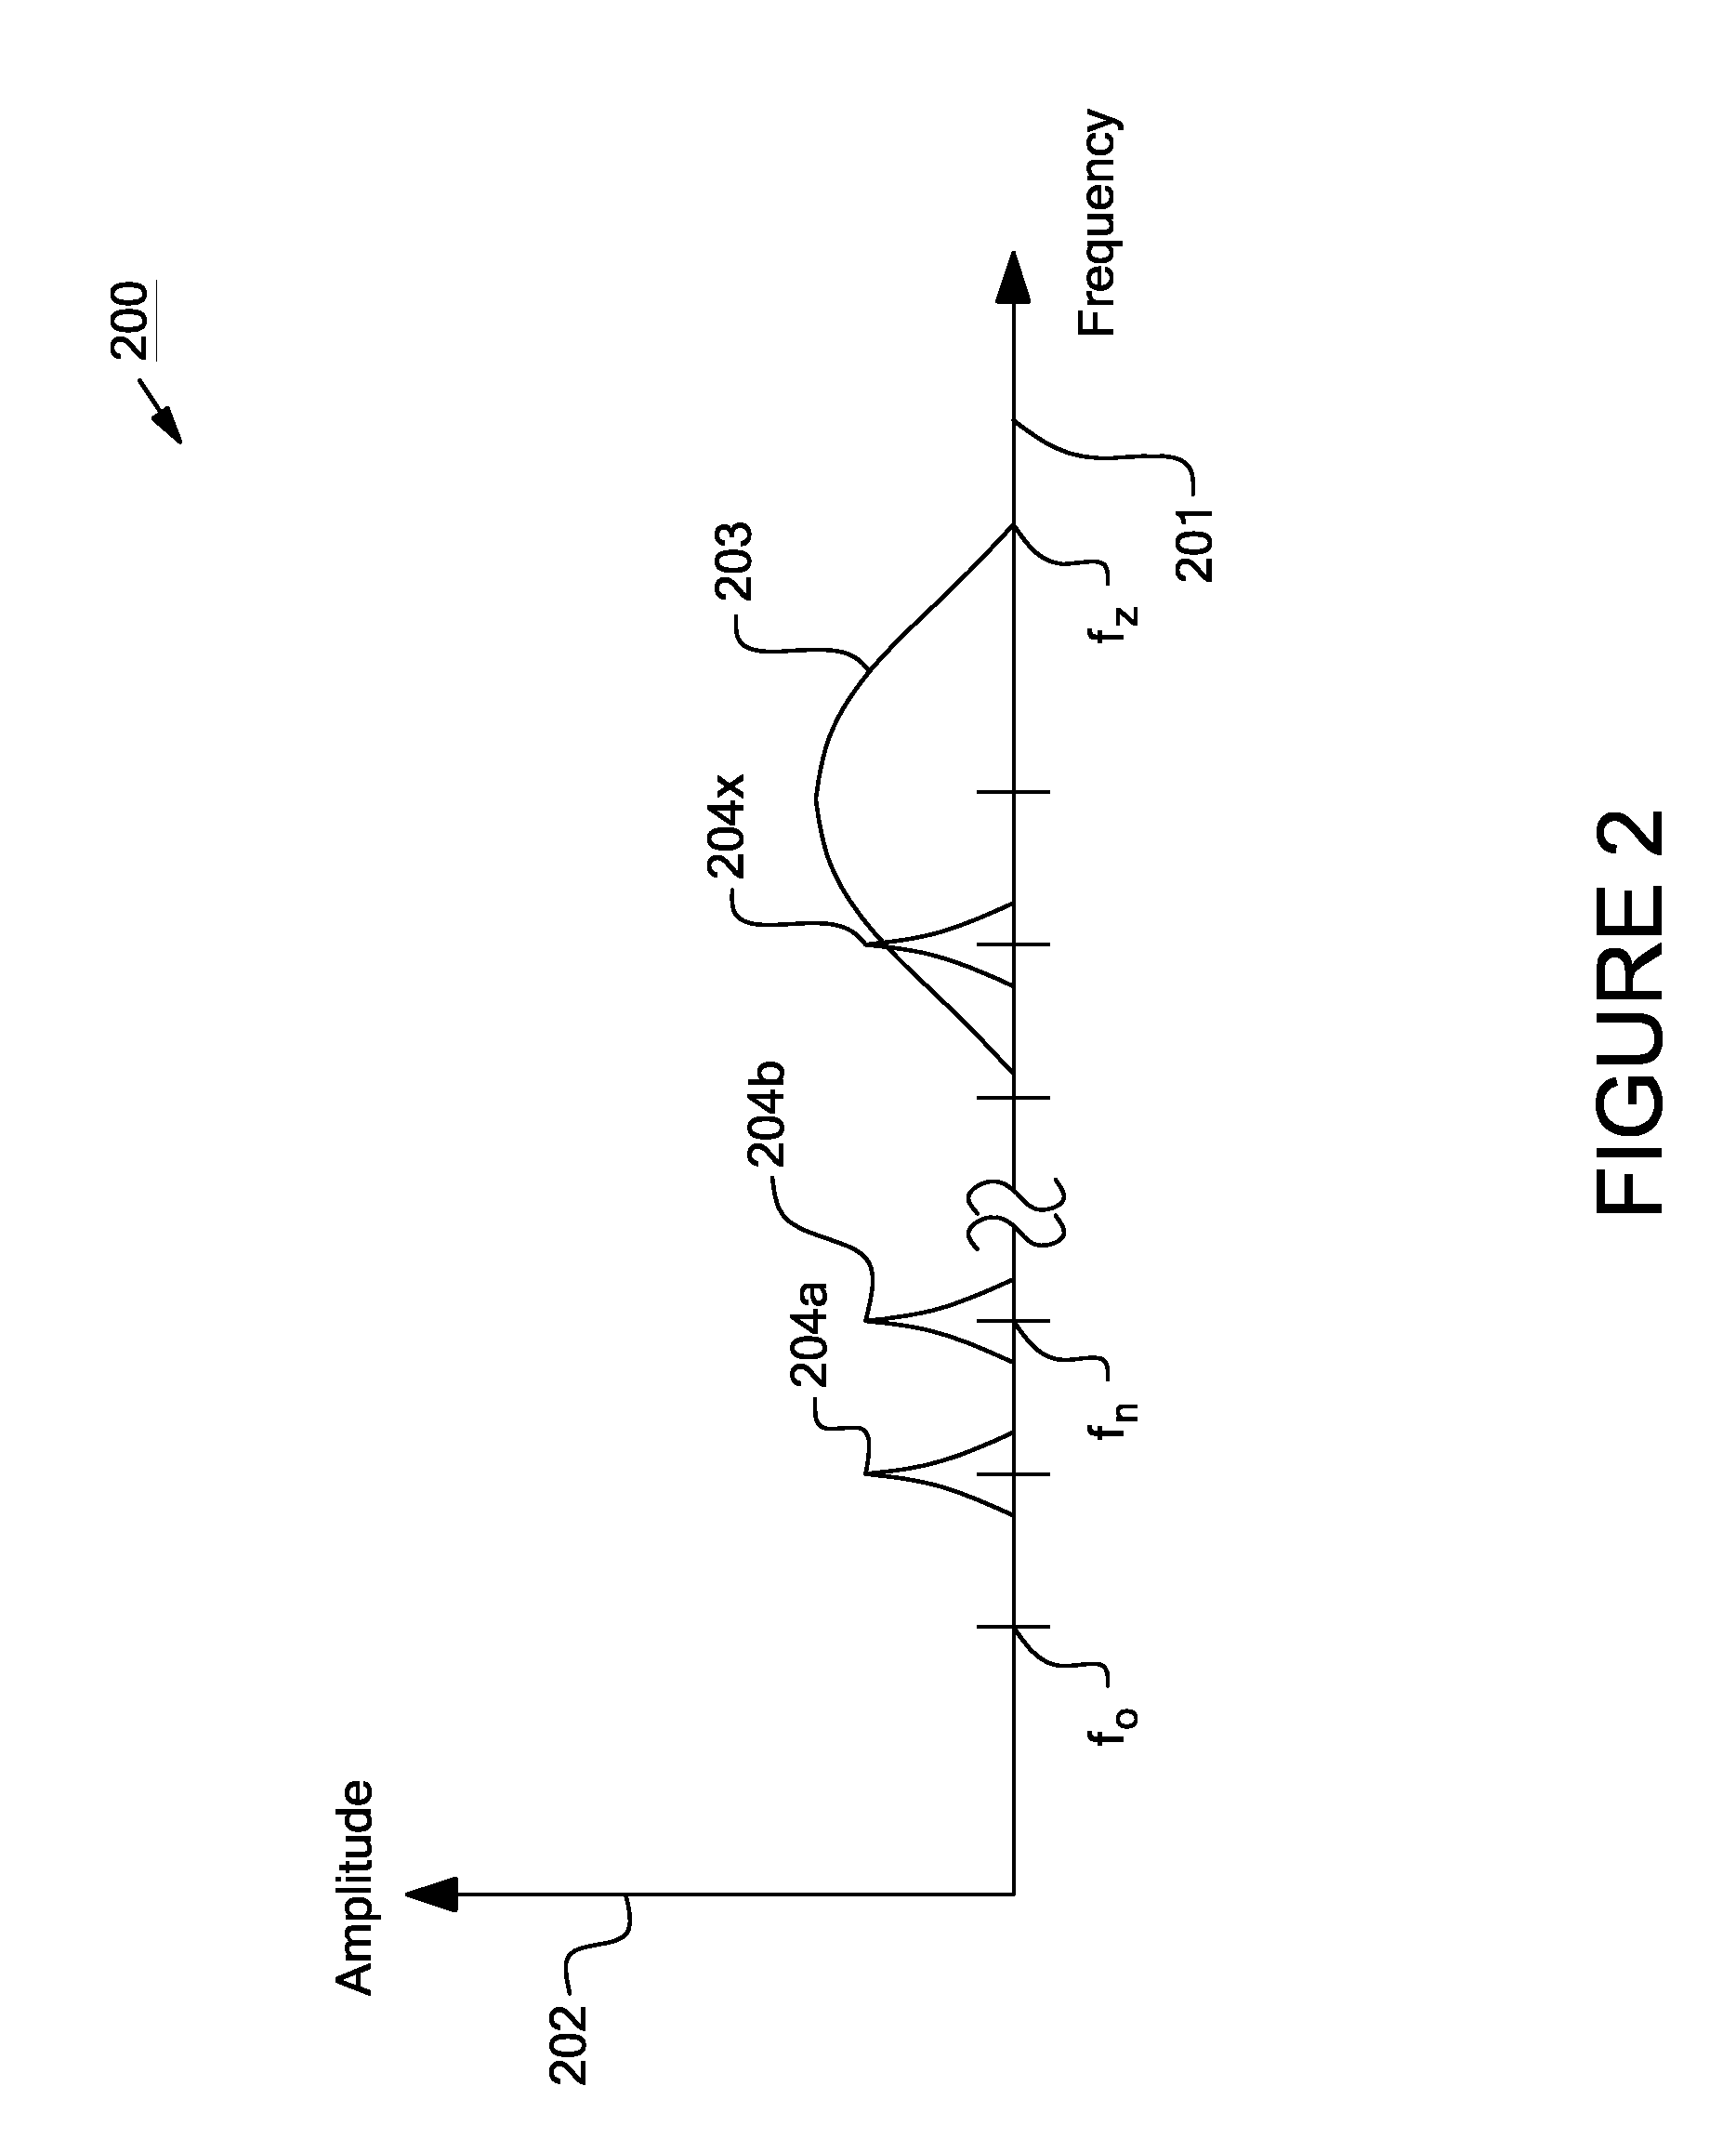 Systems and Methods for a Communication Protocol Between a Local Controller and a Master Controller